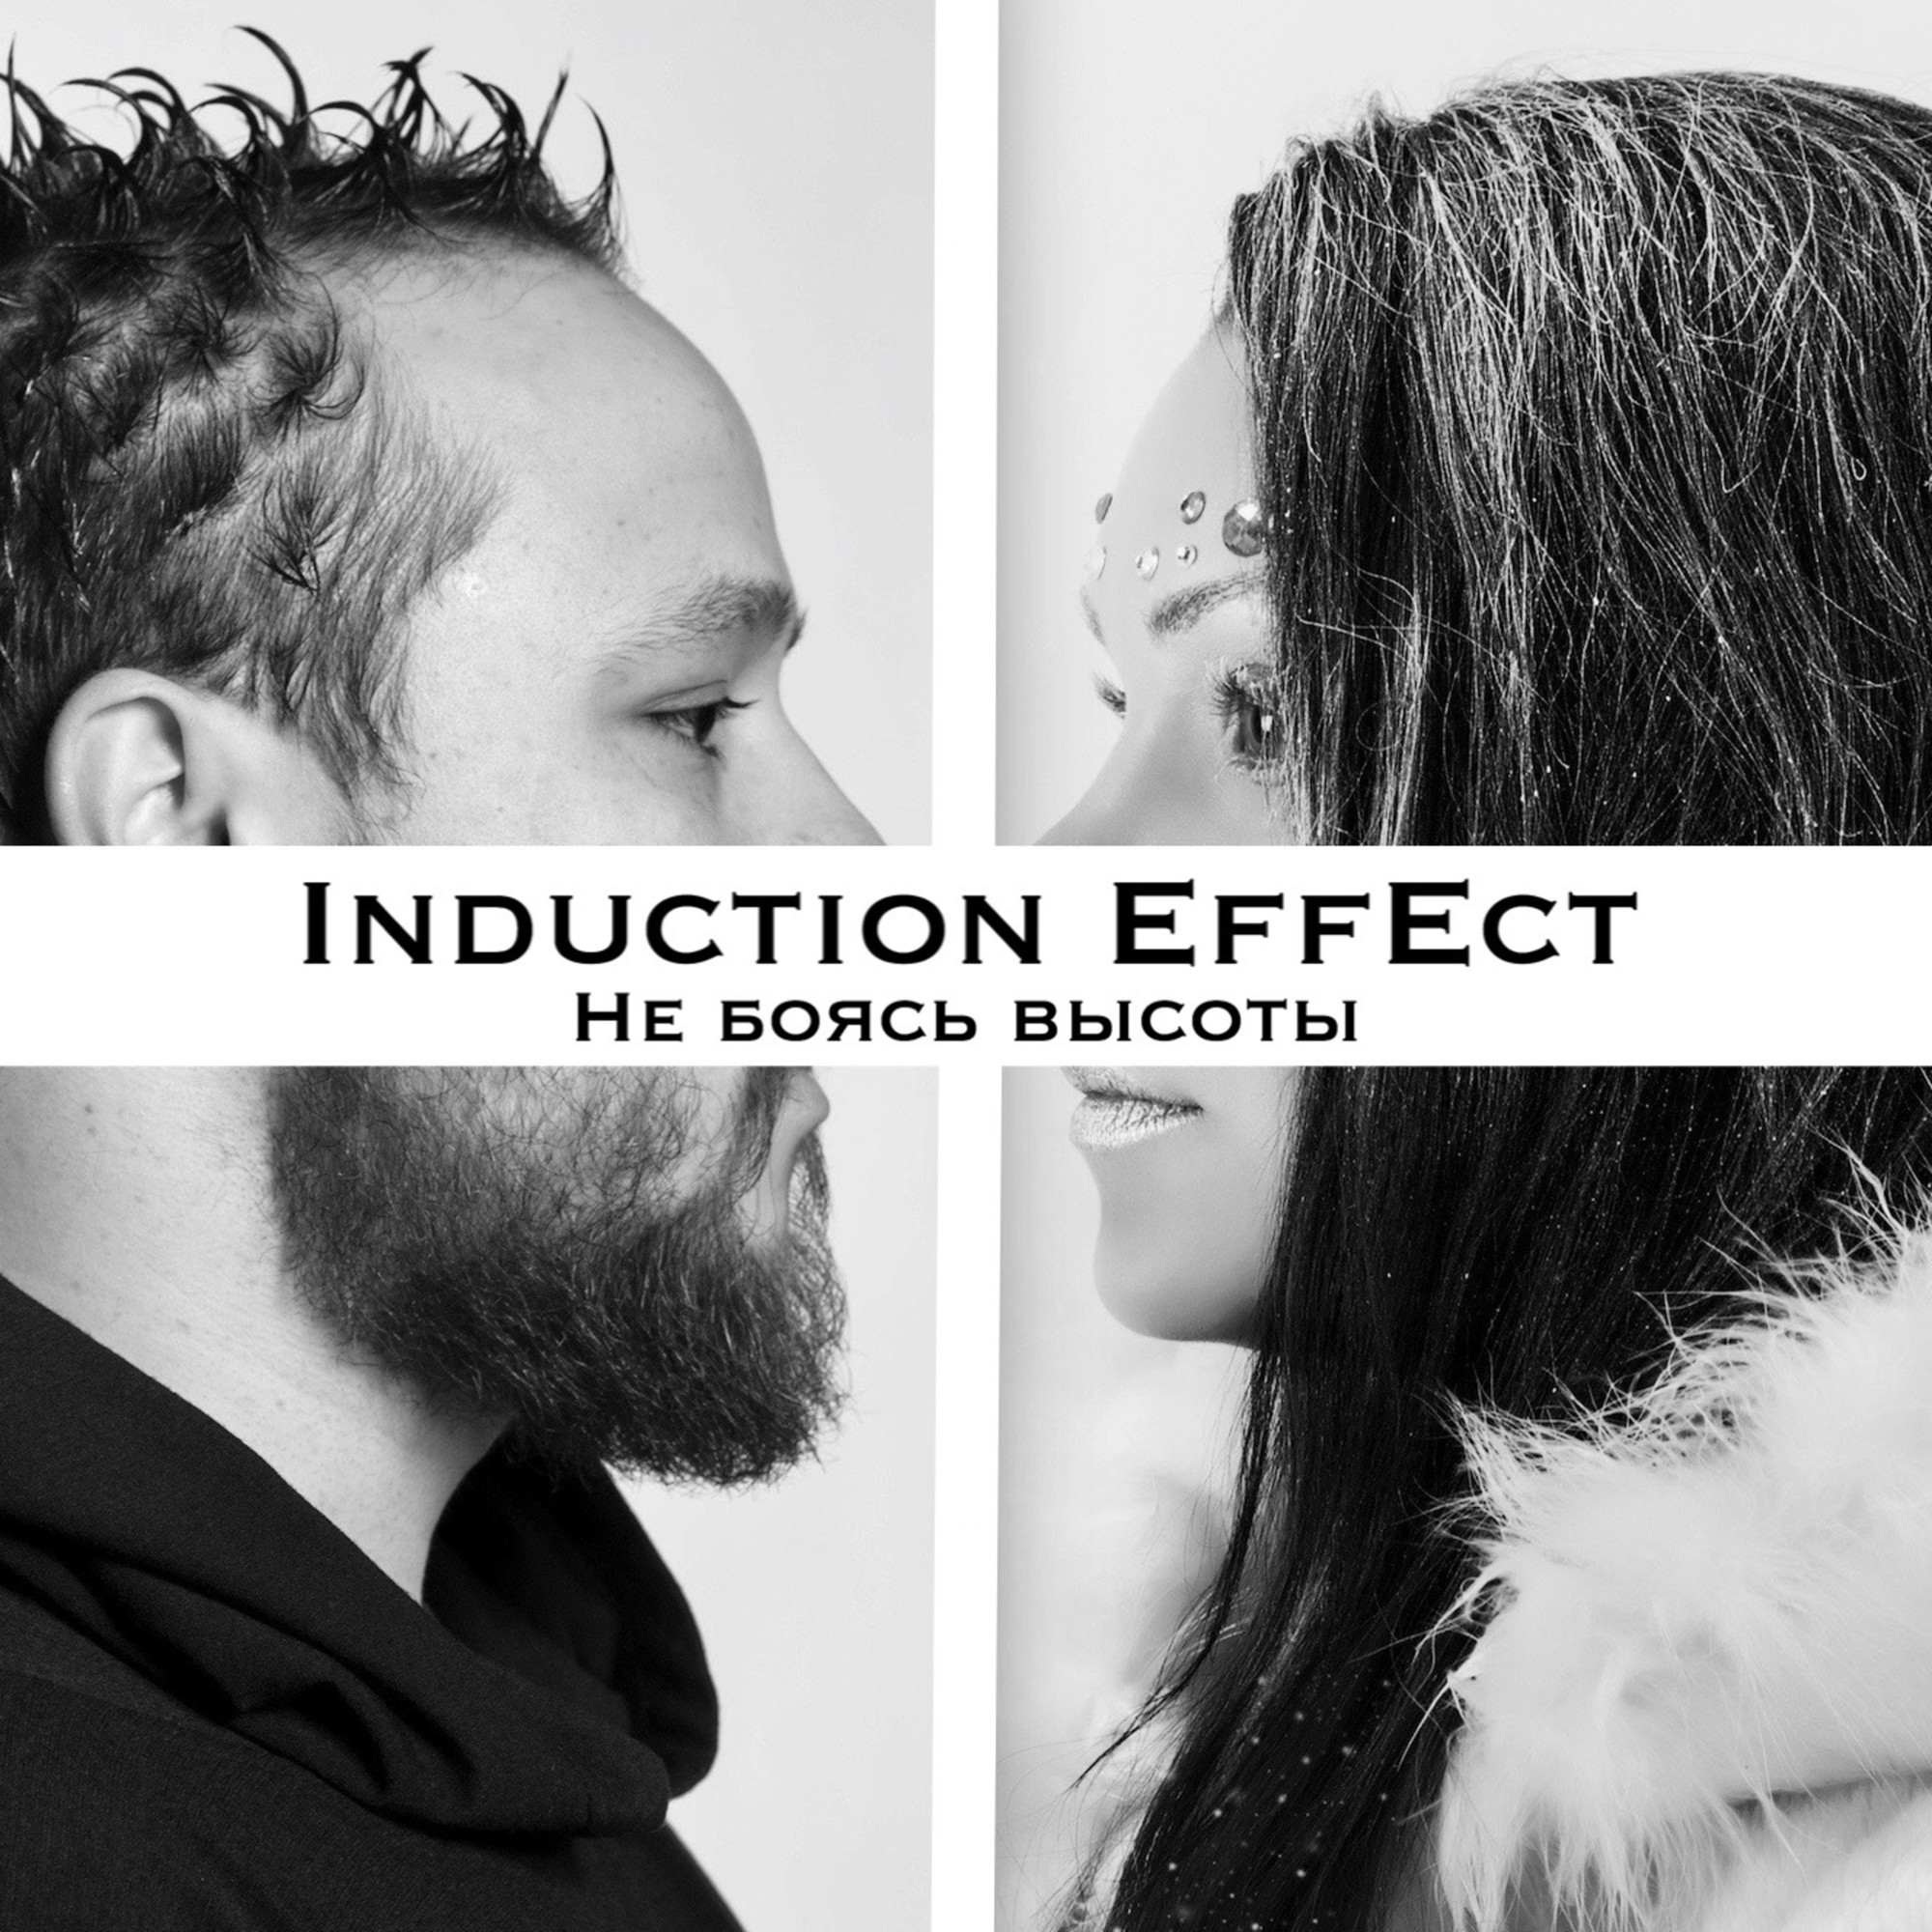 Height песни. Induction Effect. Induction Effect группа. Тысячи солнц Induction Effect. Induction Effect — новый мир.